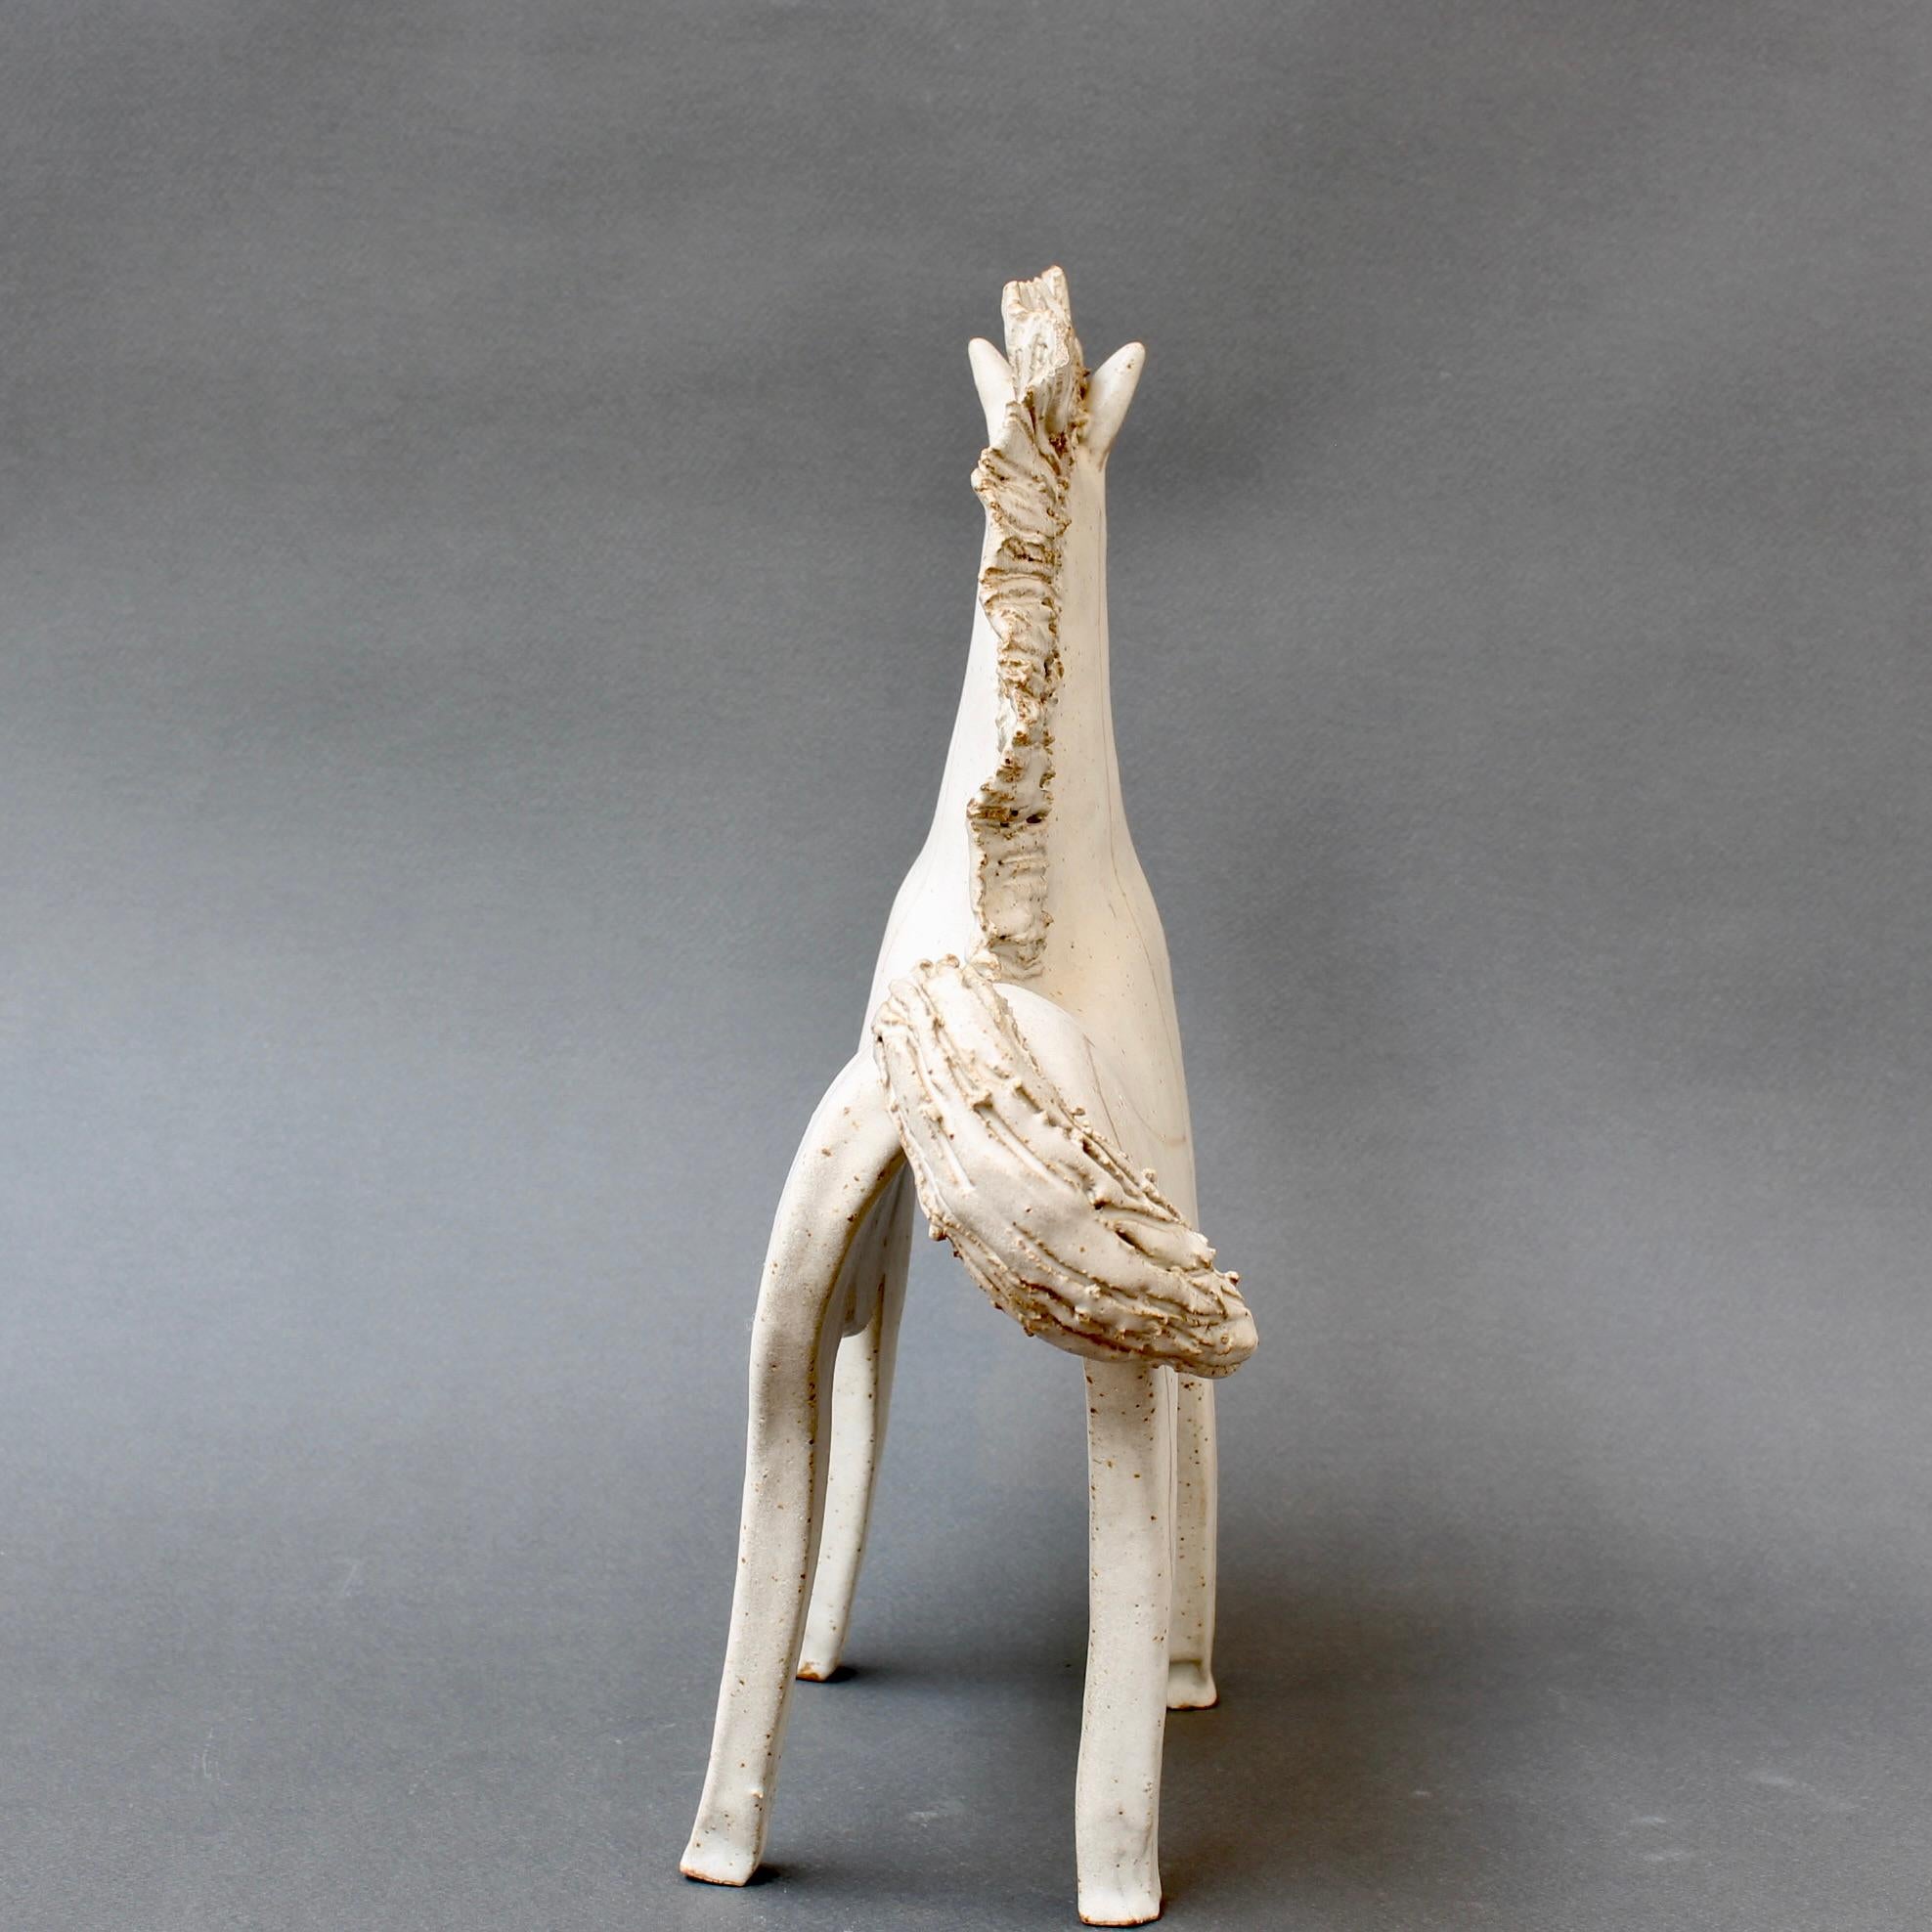 Vintage Ceramic Horse by Bruno Gambone (circa 1970s) - Large For Sale 3